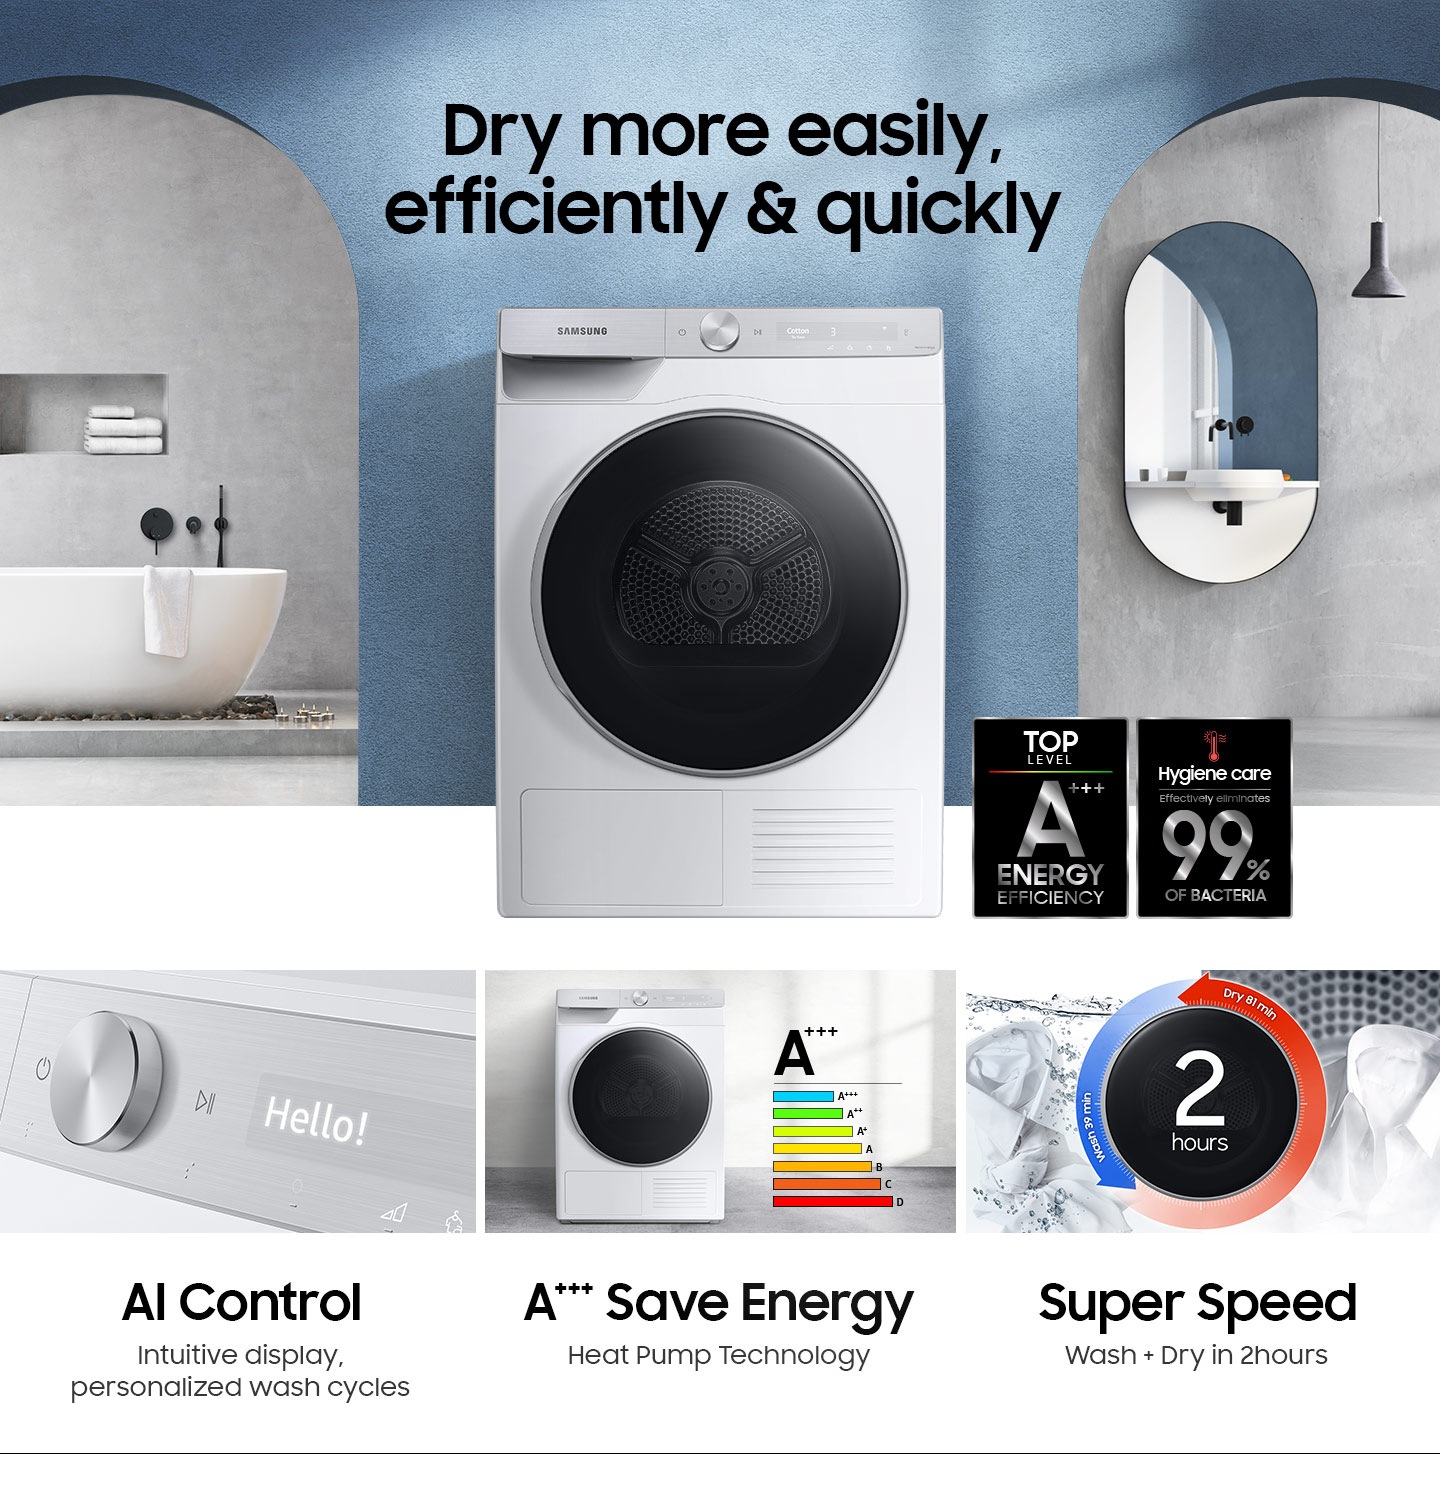 DV8000T is energy-efficient and 99% germ-free with AI Control, A+++ Save Energy, and Super Speed ​​functions.